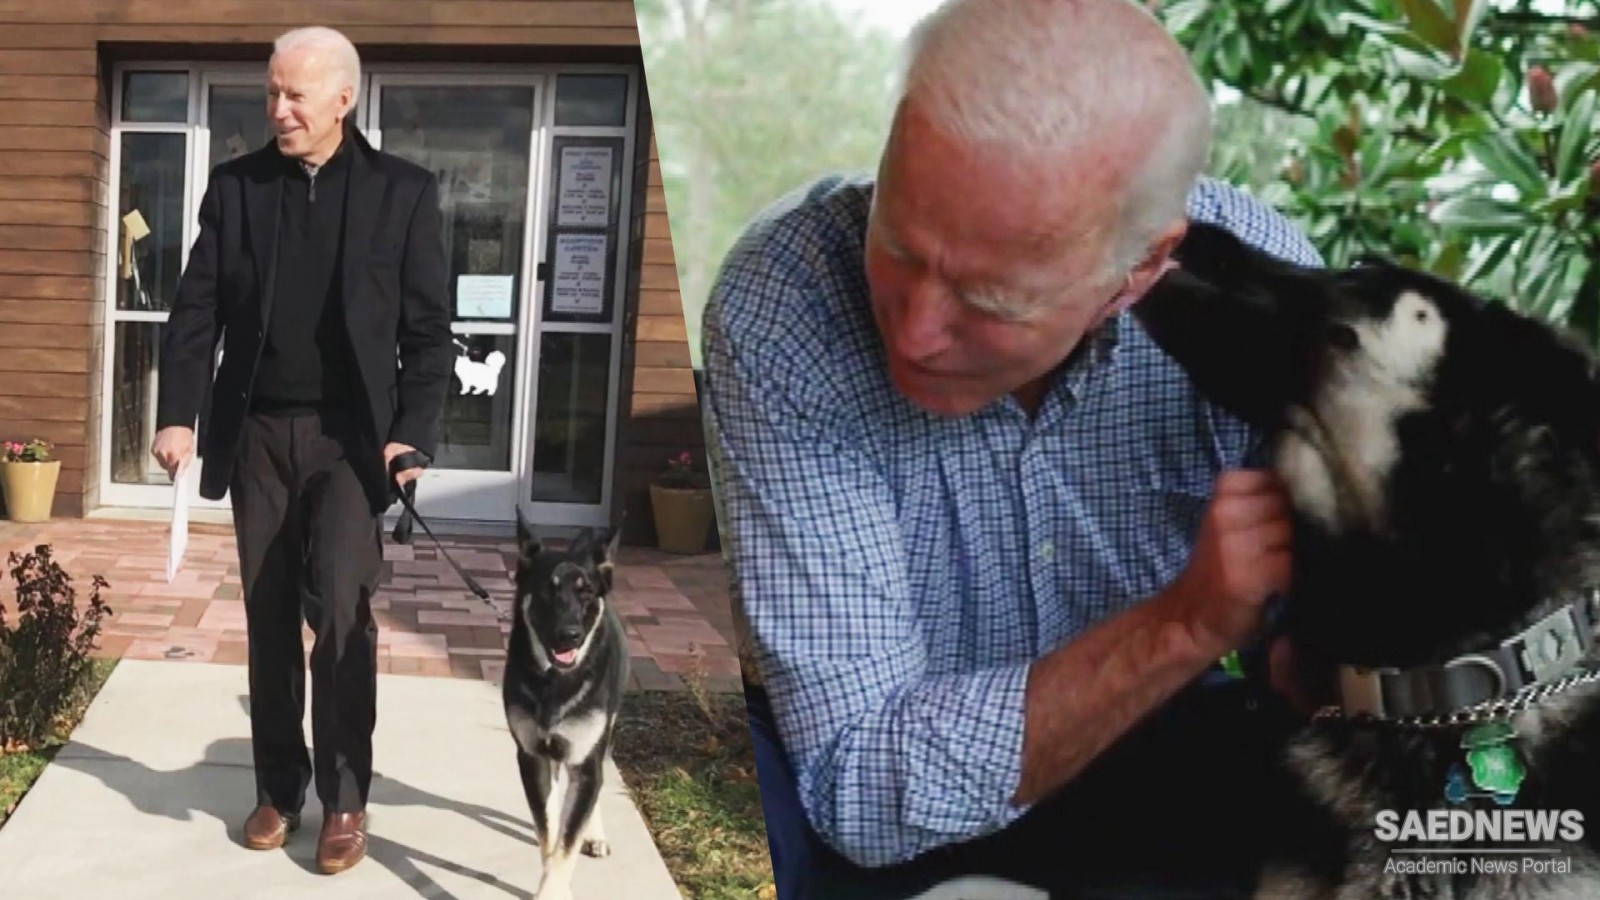 President Elect Biden Got His Ankle Twisted with Hairline Fractures Playing His Dog Major